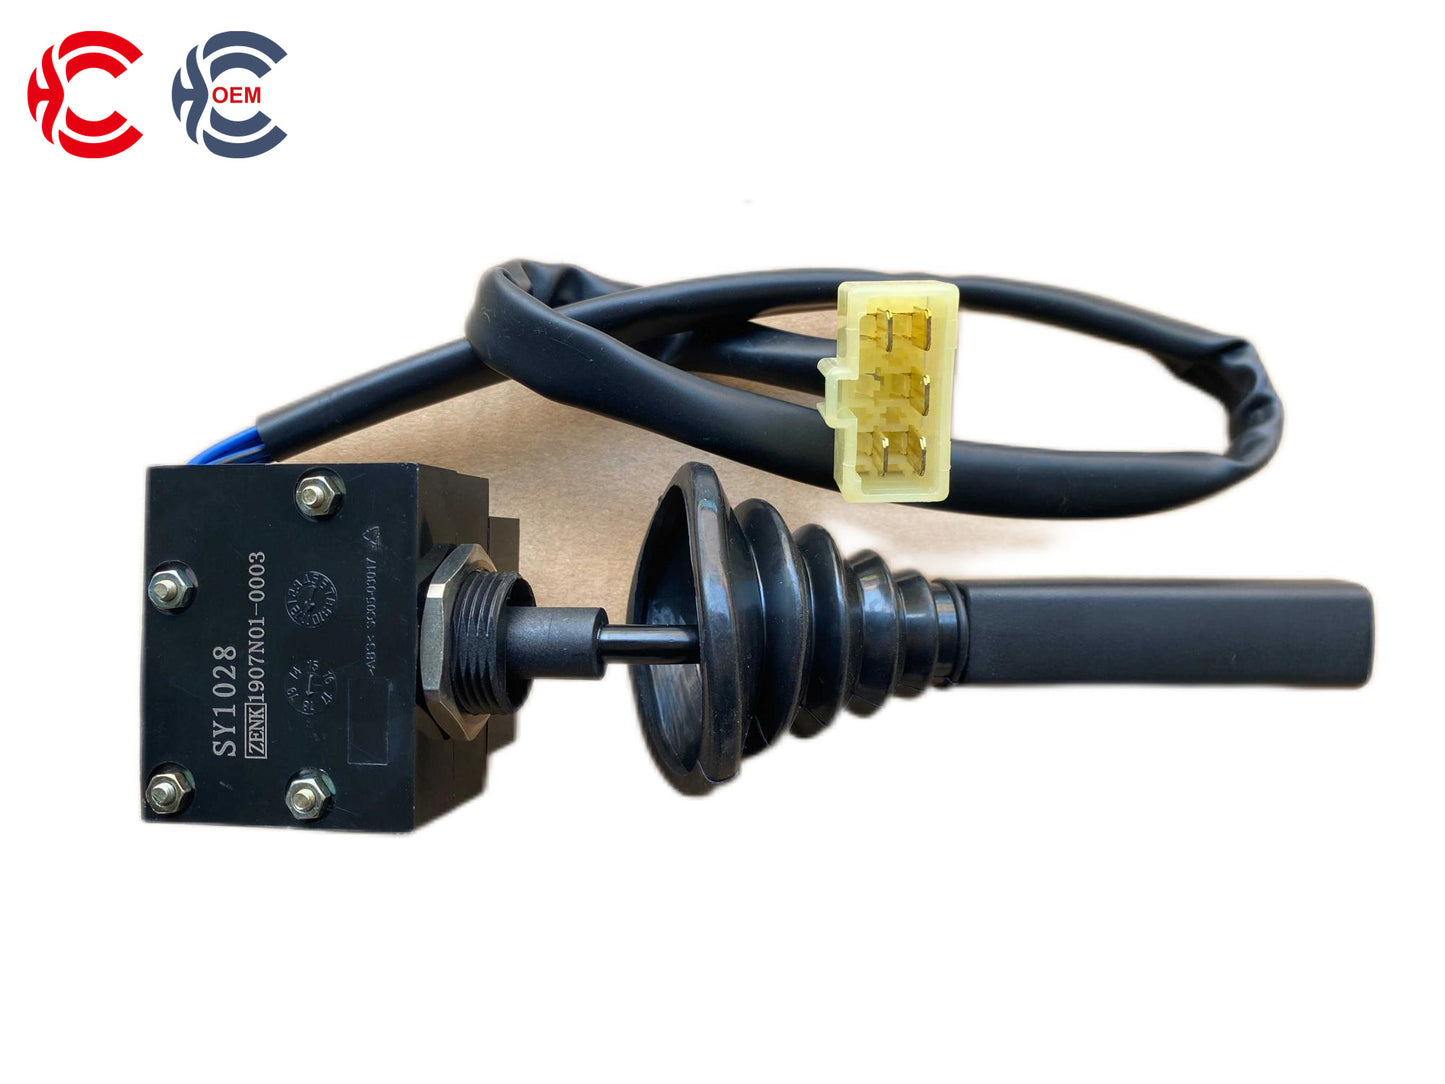 OEM: SY1028 1907N01-0003Material: ABS MetalColor: Black SilverOrigin: Made in ChinaWeight: 200gPacking List: 1* Retarder Handle Switch More ServiceWe can provide OEM Manufacturing serviceWe can Be your one-step solution for Auto PartsWe can provide technical scheme for you Feel Free to Contact Us, We will get back to you as soon as possible.